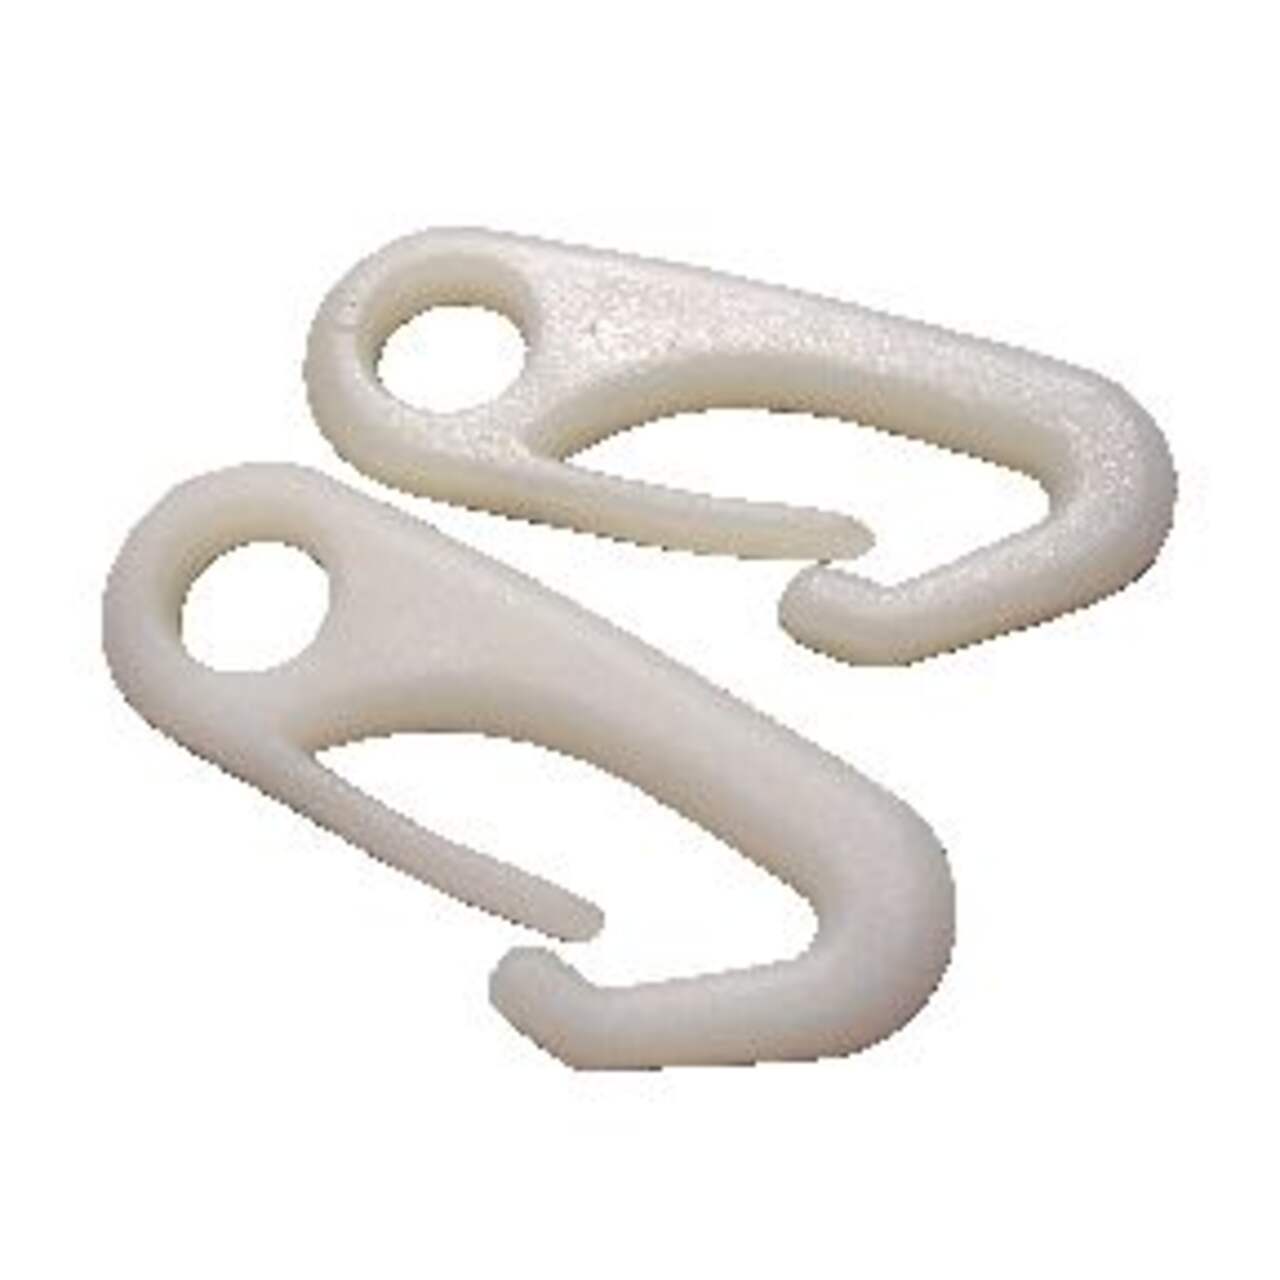 Flag Snap Hook Clips, Attach Flag Grommets to Halyard Rope, 2-pk, White